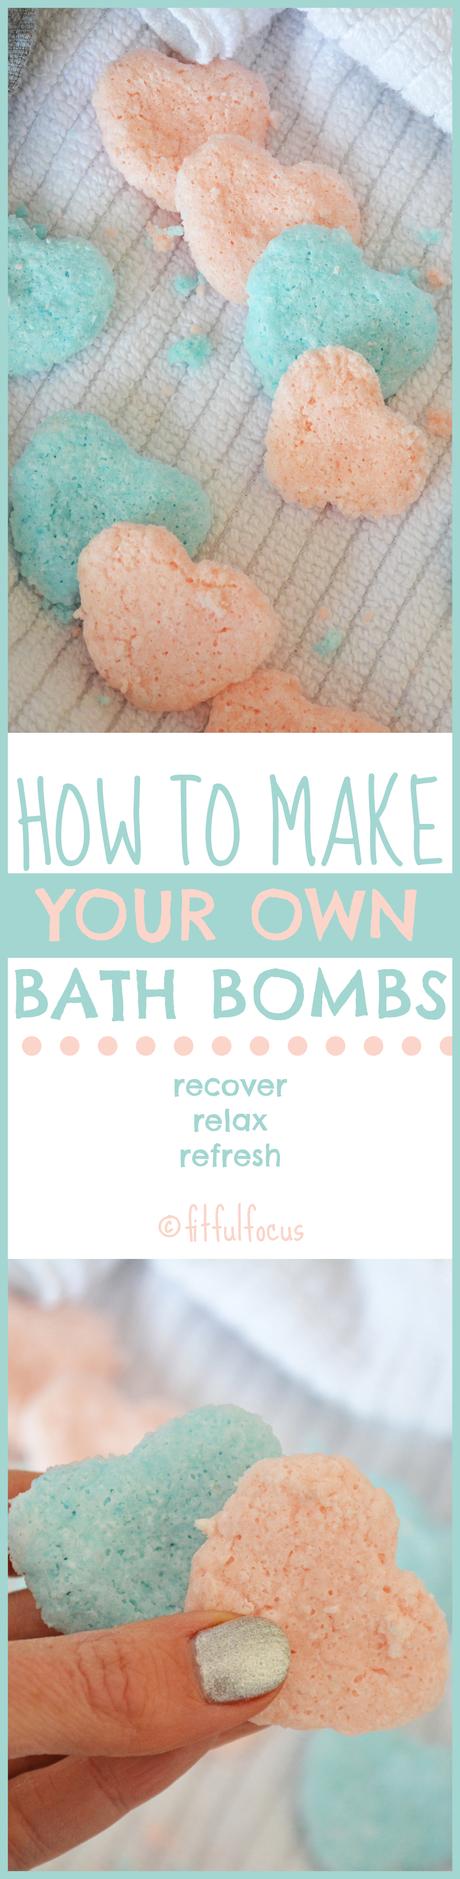 How To Make Your Own Bath Bombs